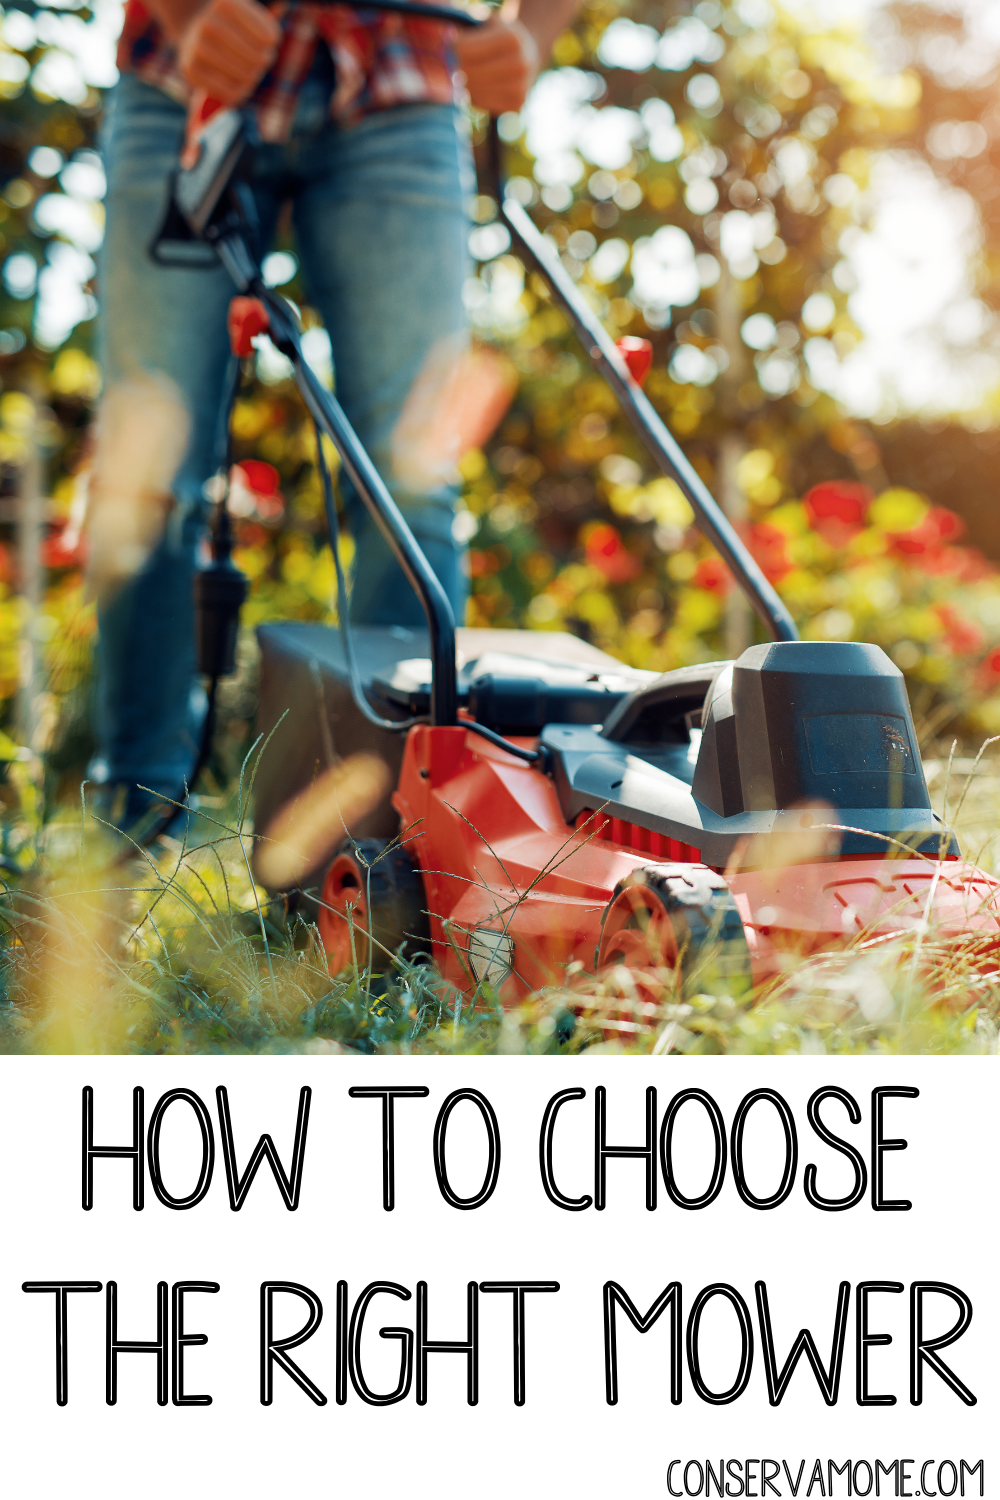 How to choose the right mower for your needs